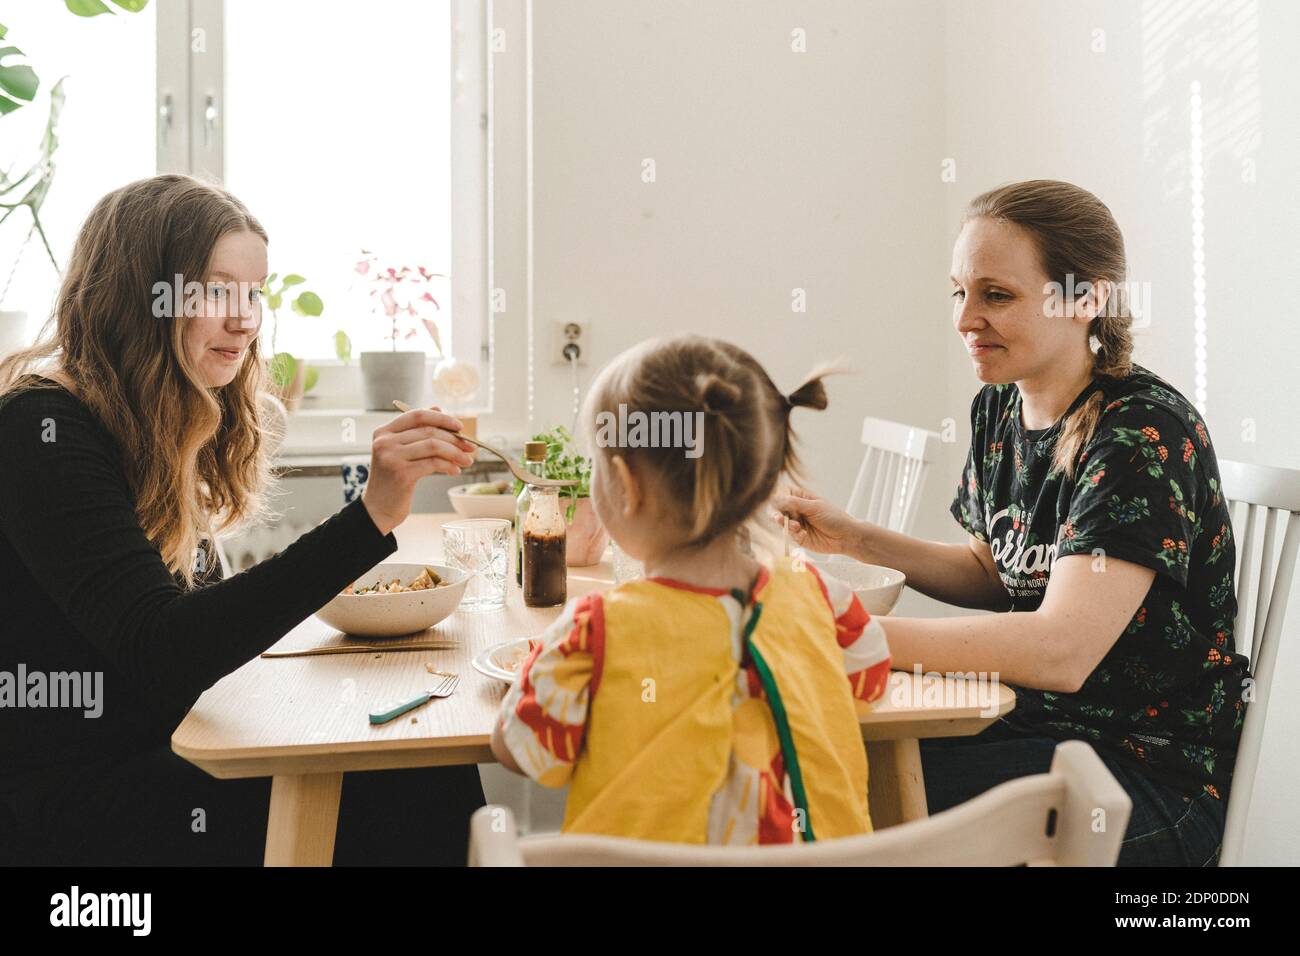 Family with daughter sitting at table Stock Photo